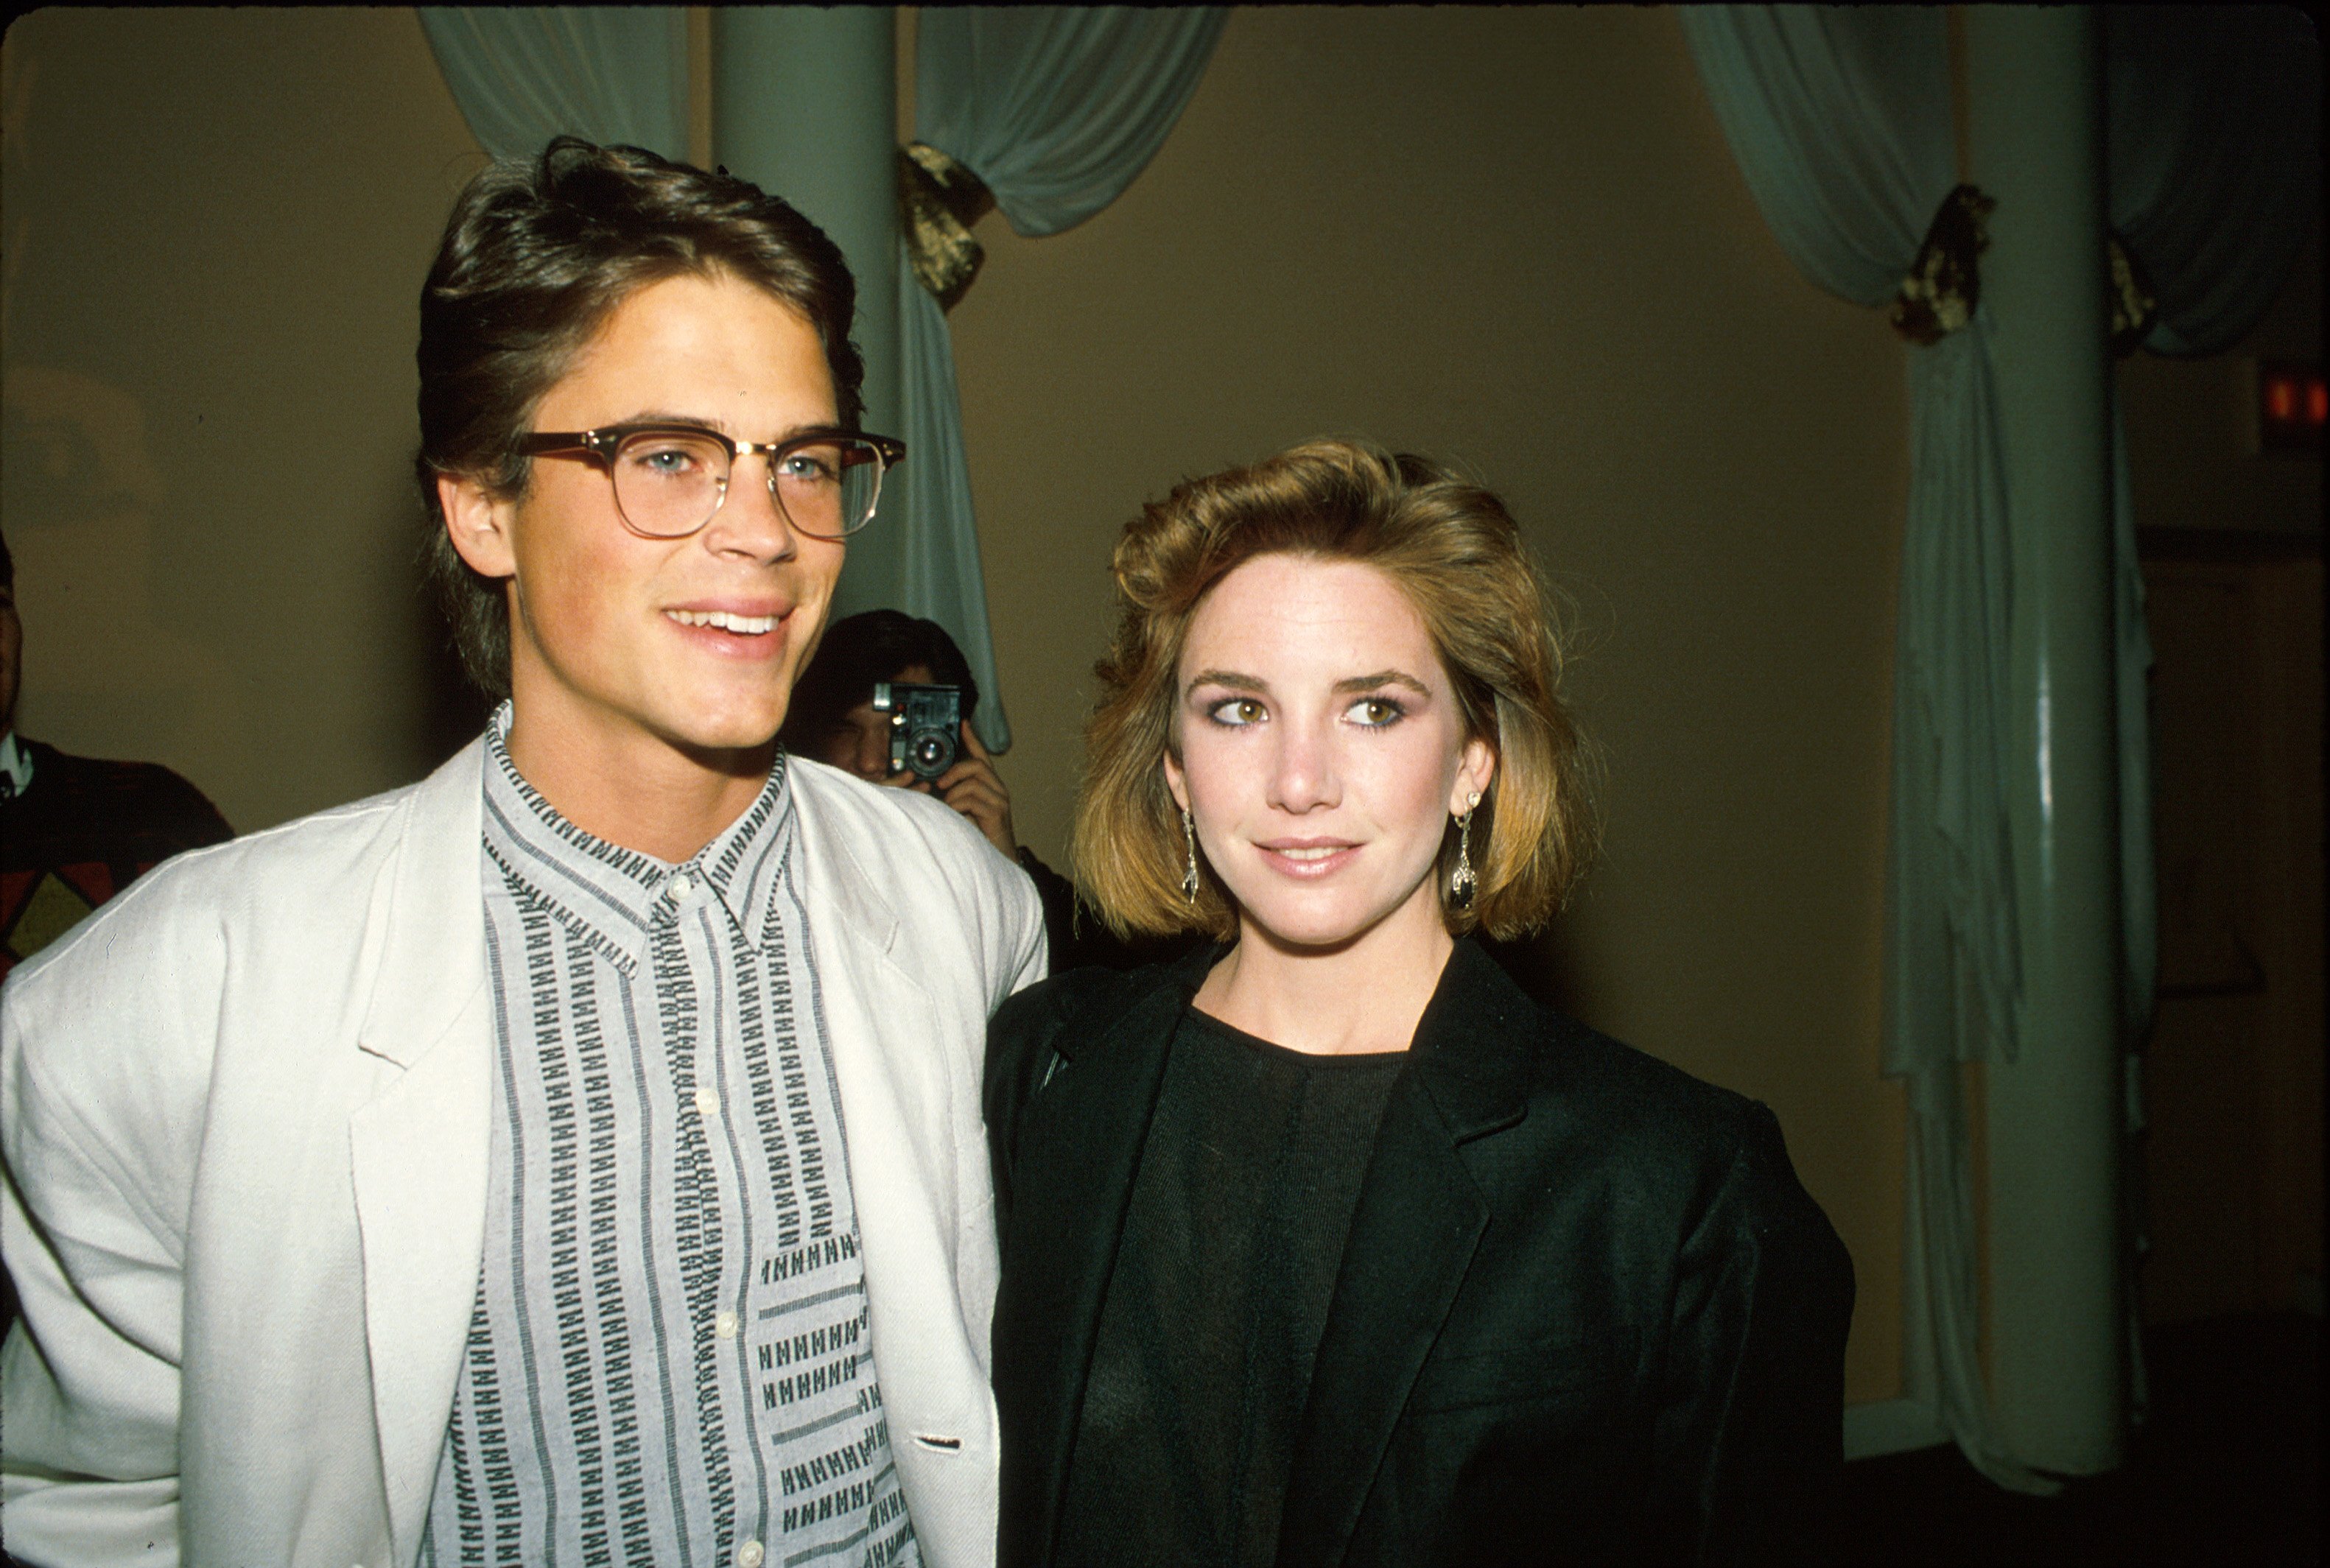 A close-up of Rob Lowe and Melissa Gilbert 1984. 